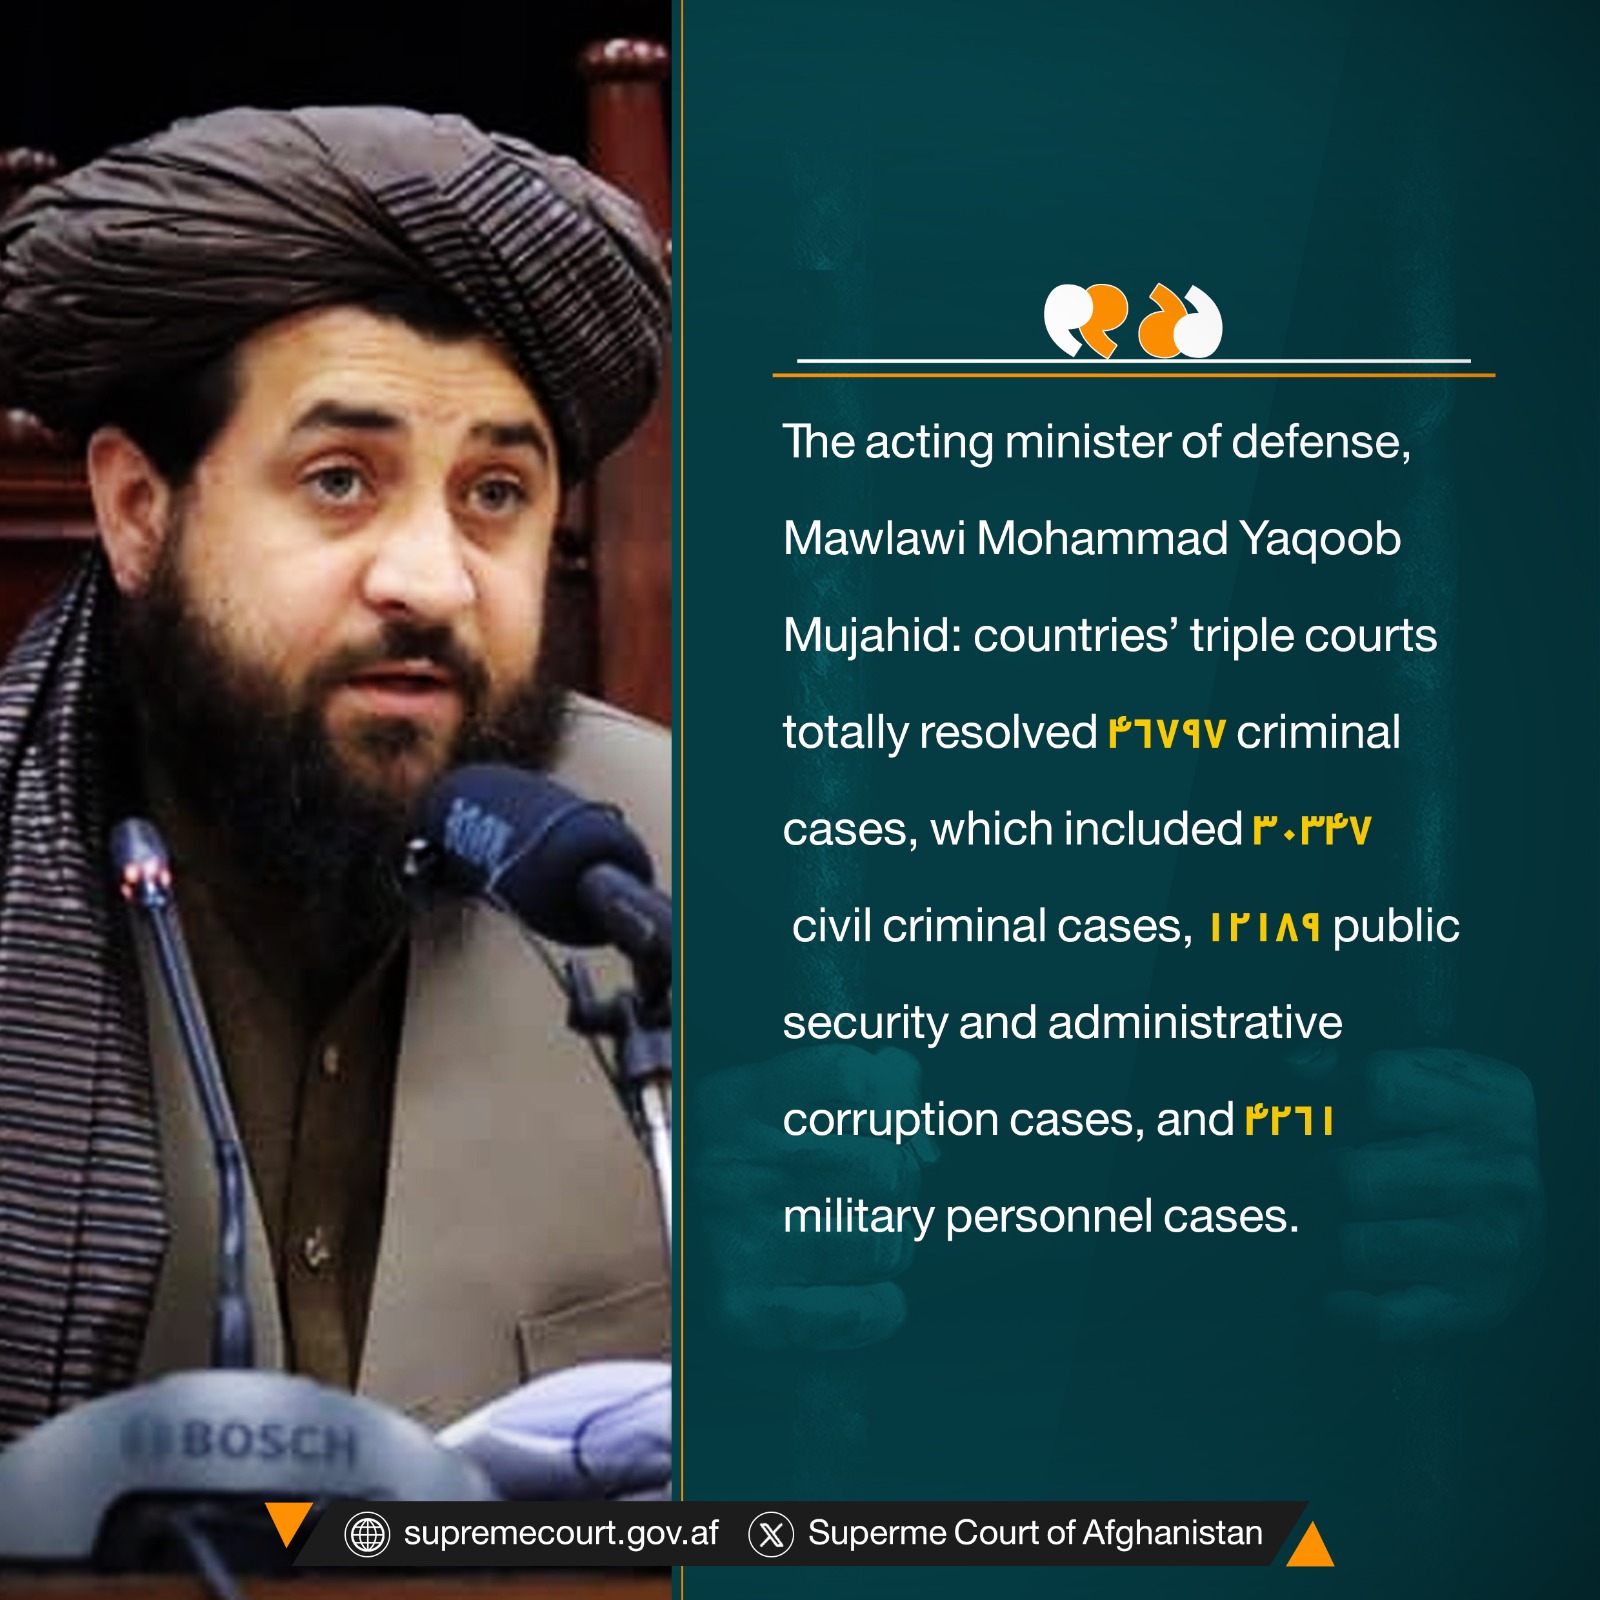 The acting minister of defense, Mawlawi Mohammad Yaqoob Mujahid: countries’ triple courts totally resolved 46797 criminal cases, which included 30347 civil criminal cases, 12189 public security and administrative corruption cases, and 4261 military personnel cases.